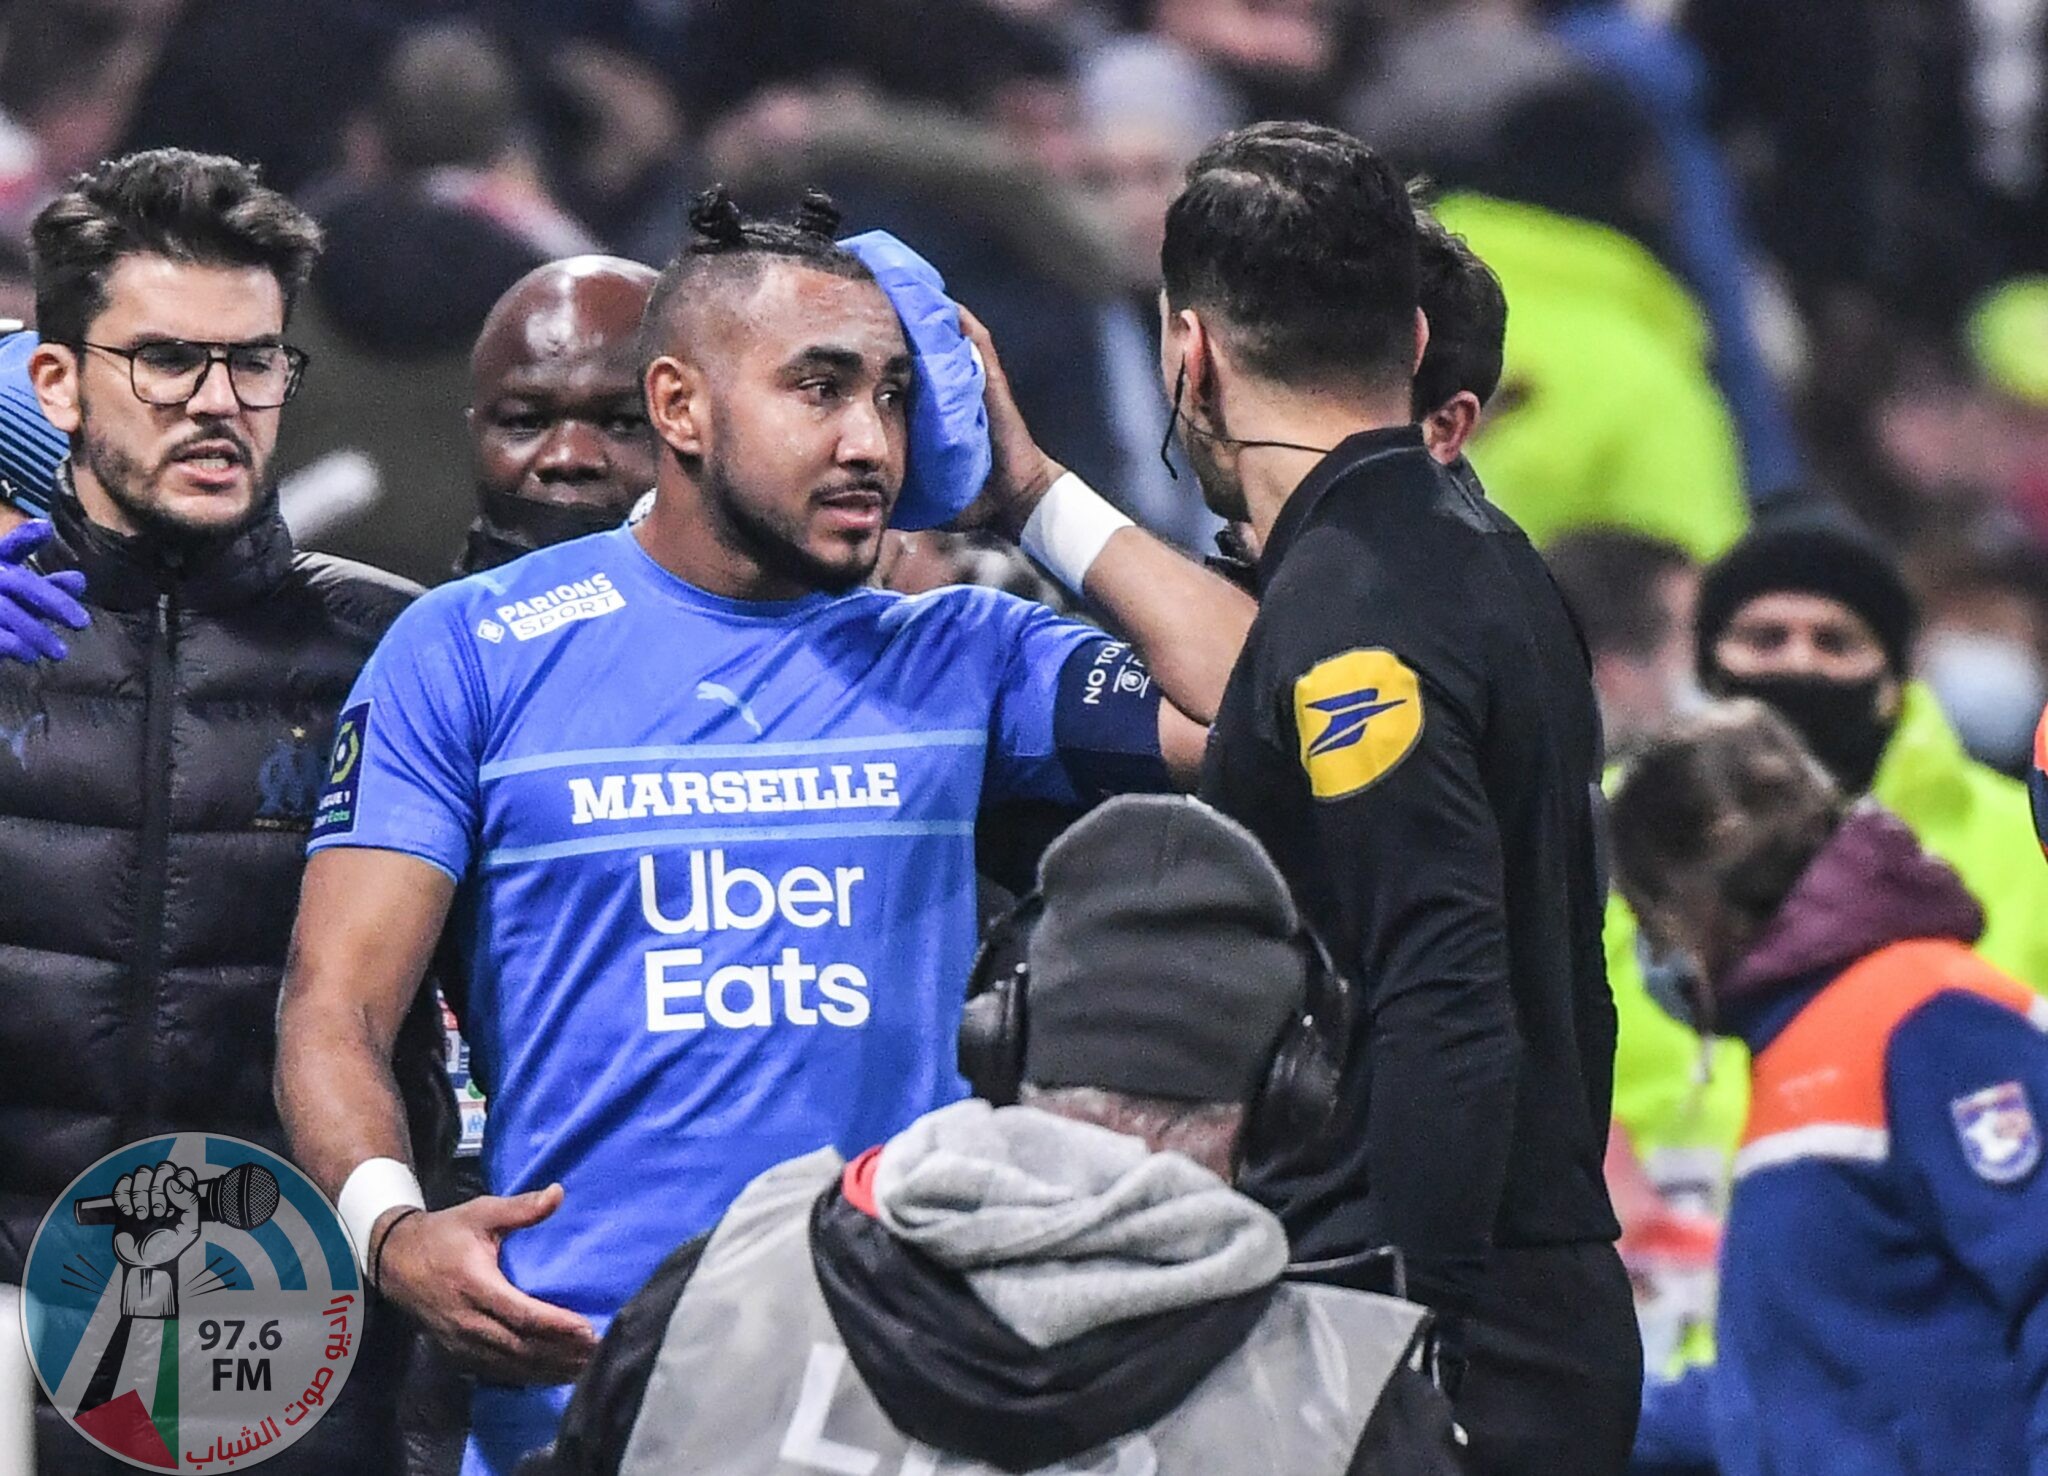 Marseille's French midfielder Dimitri Payet (C) leaves the field after having received a bottle of water from the grandstand during the French L1 football match between Olympique Lyonnais and Olympique de Marseille at the Groupama stadium in Decines-Charpieu, near Lyon, south-eastern France, on November 21, 2021. (Photo by PHILIPPE DESMAZES / AFP)